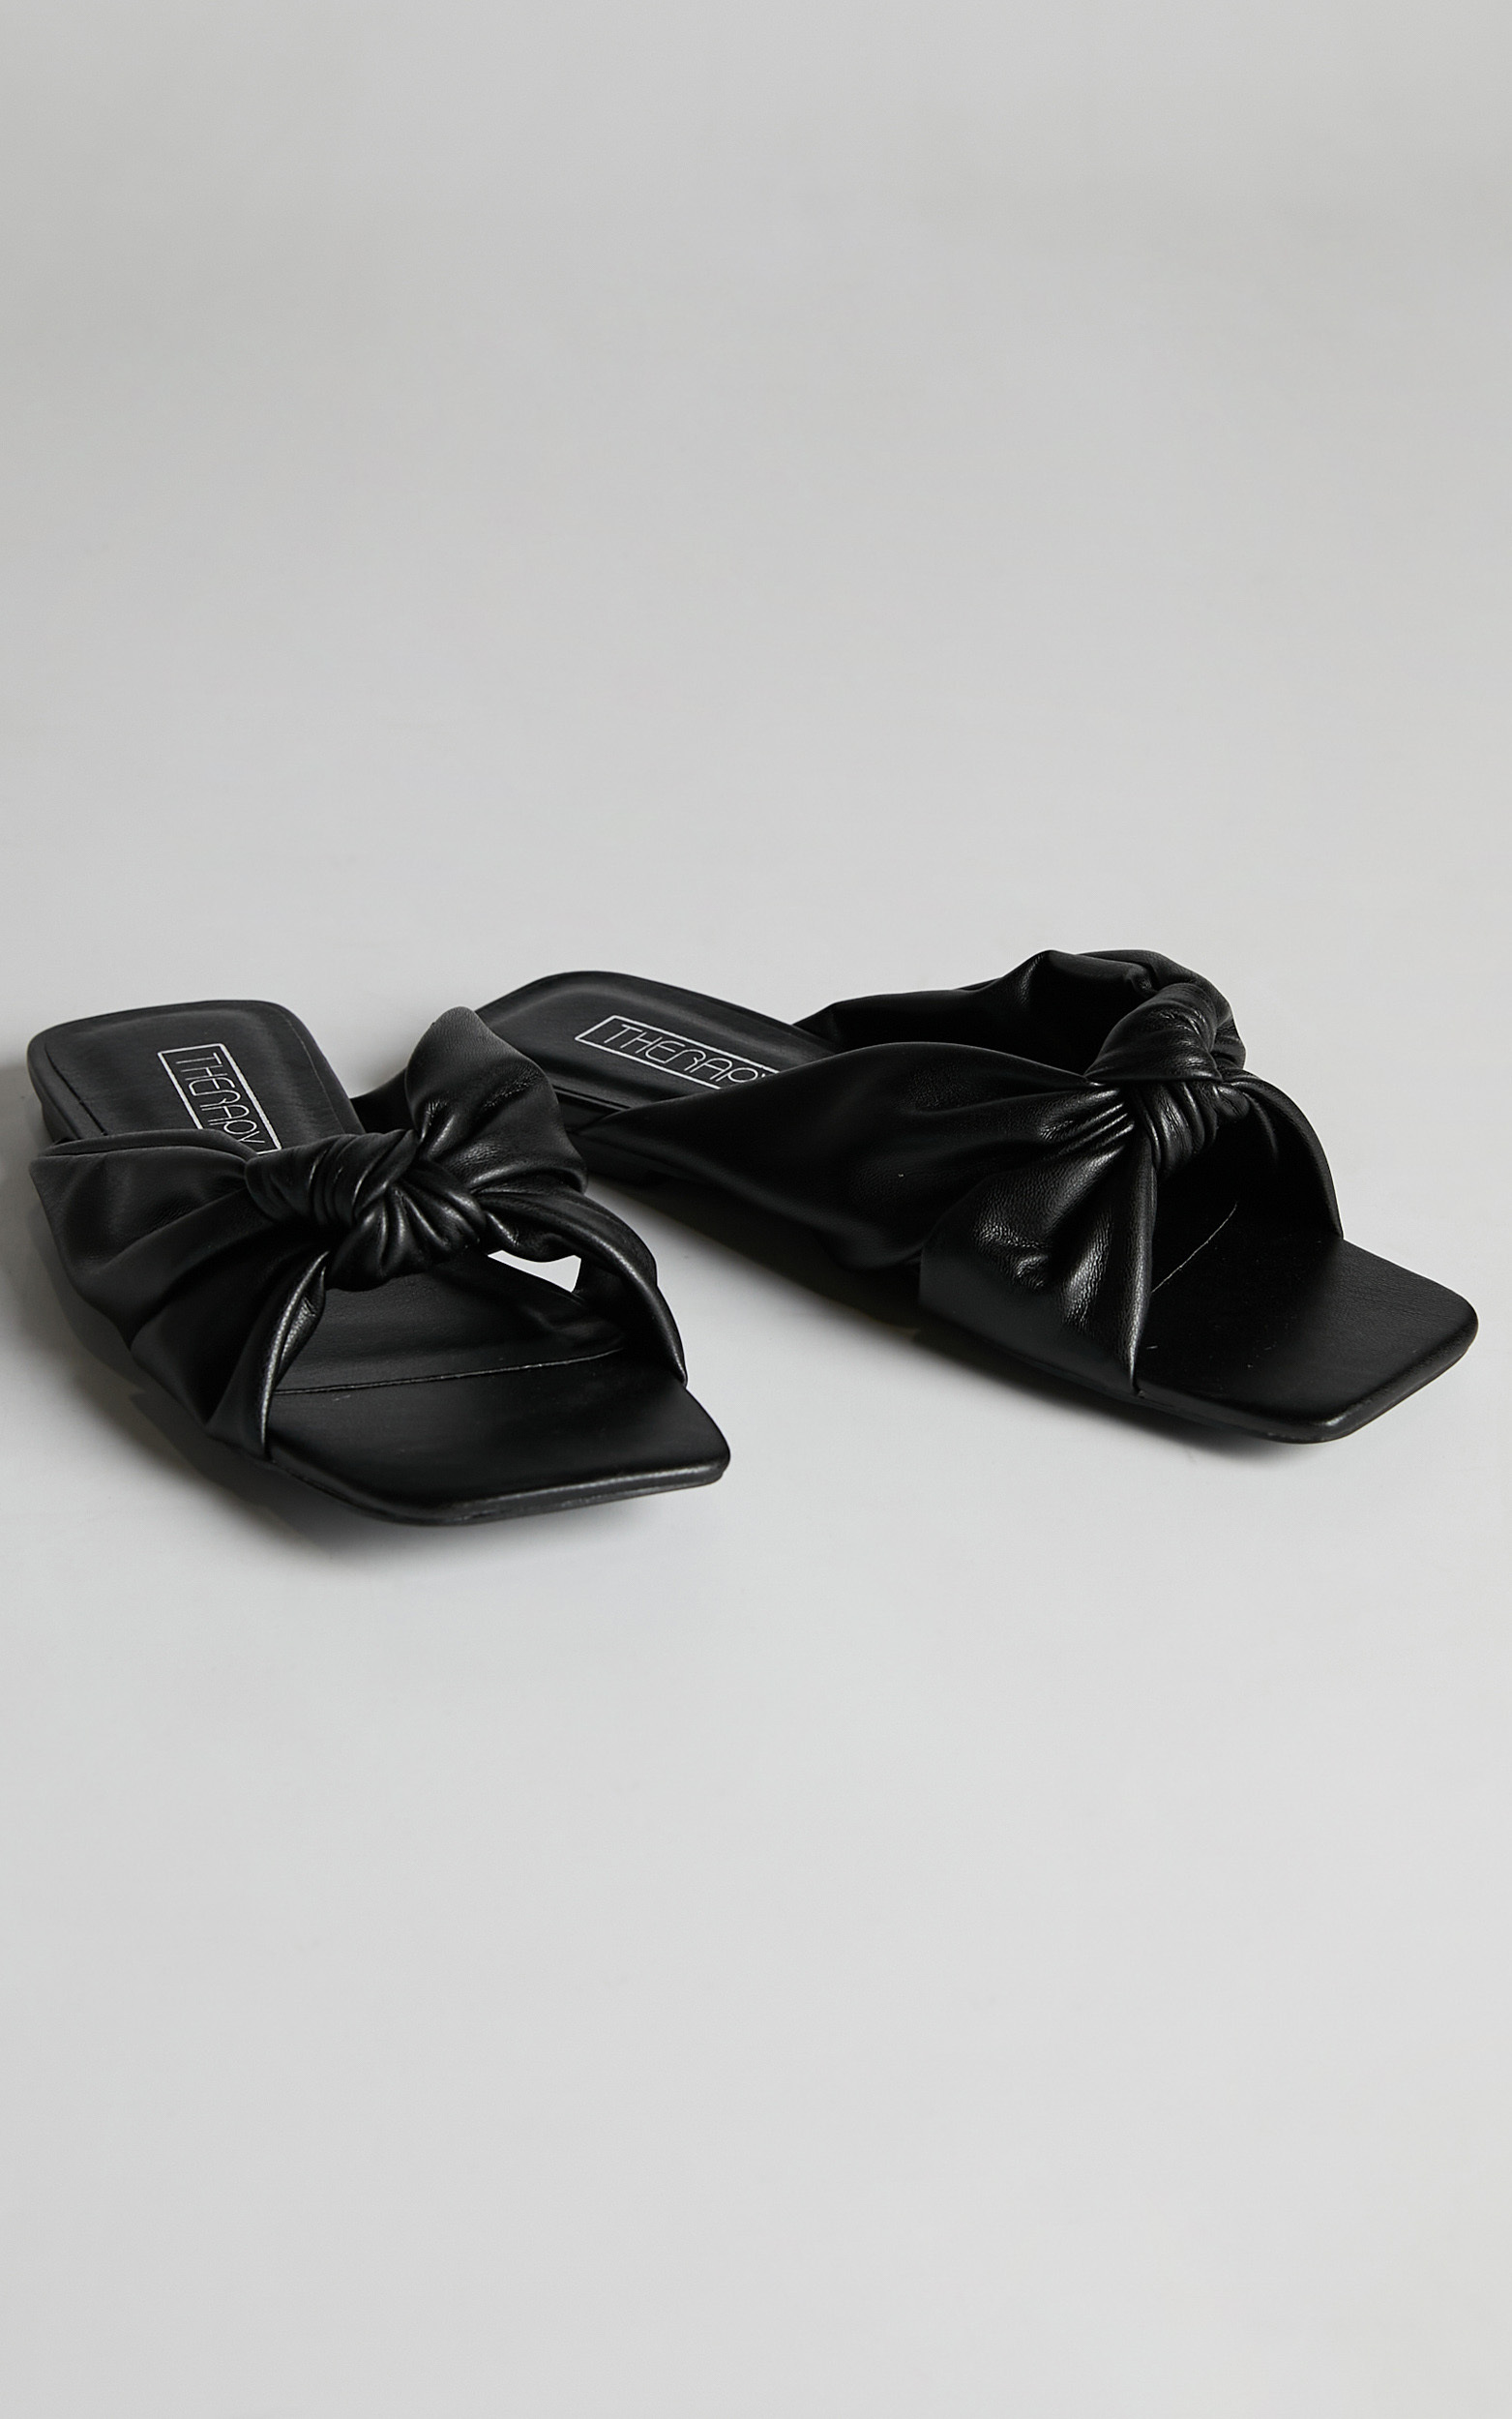 THERAPY - SOFIA SANDALS in Black - 05, BLK1, hi-res image number null